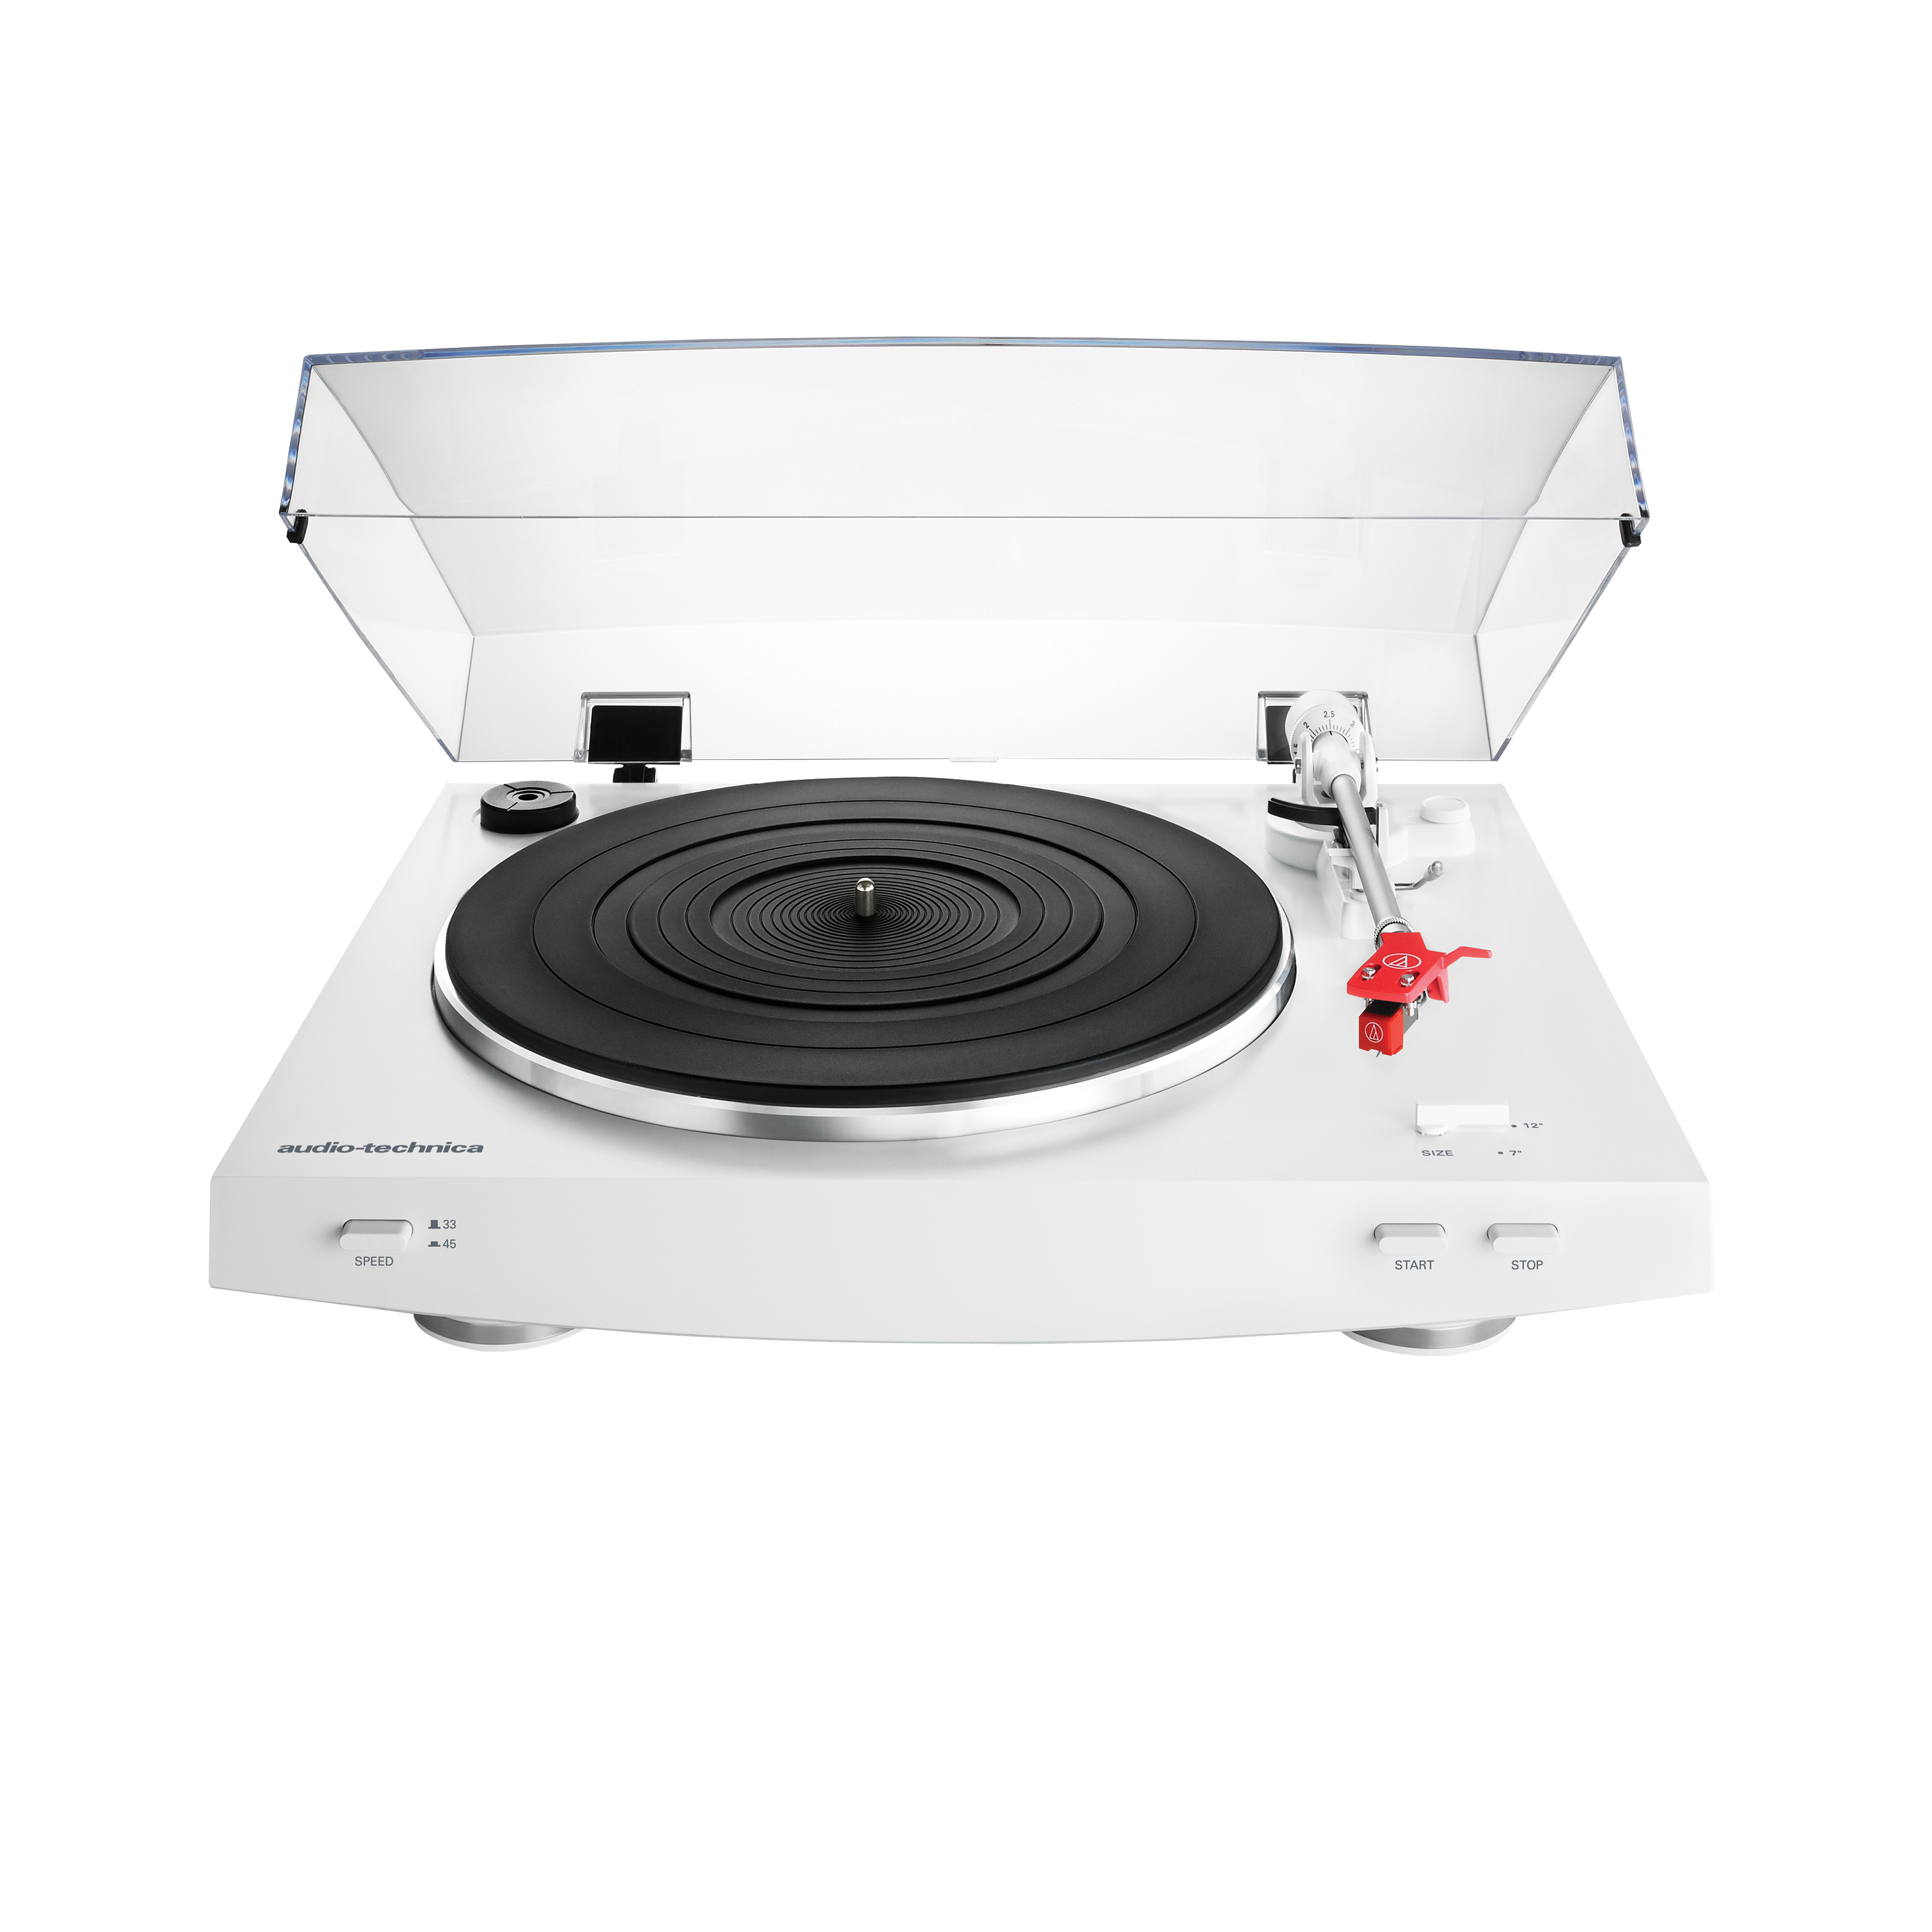 Audio-Technica Fully Automatic Belt Drive Stereo Turntable Record Player, White - image 1 of 2